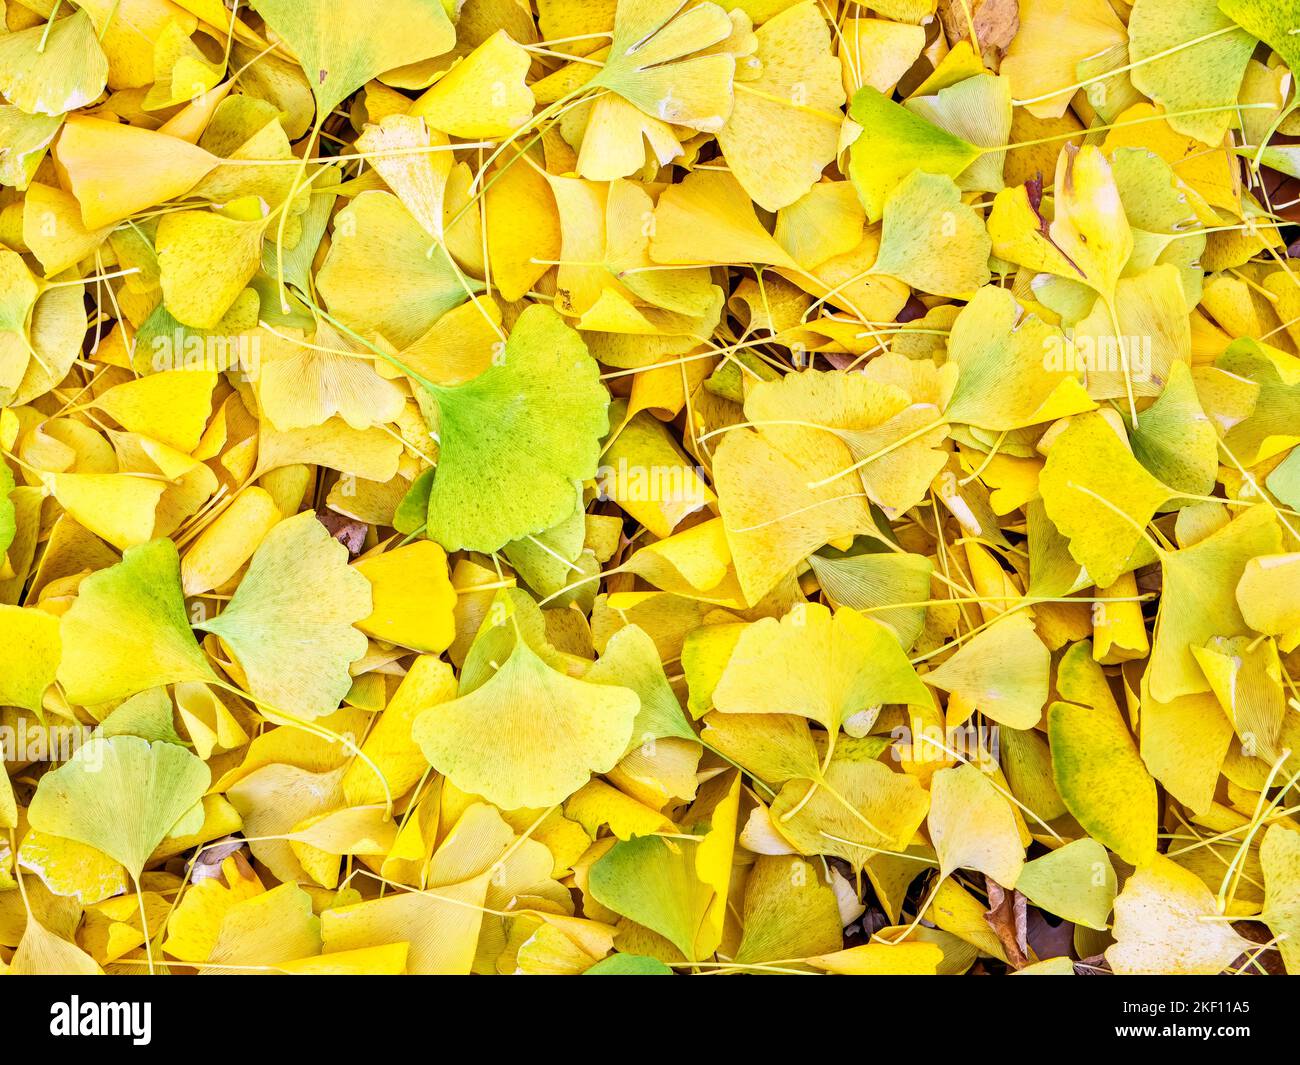 Ginkgo leaves on ground in autumn. Stock Photo